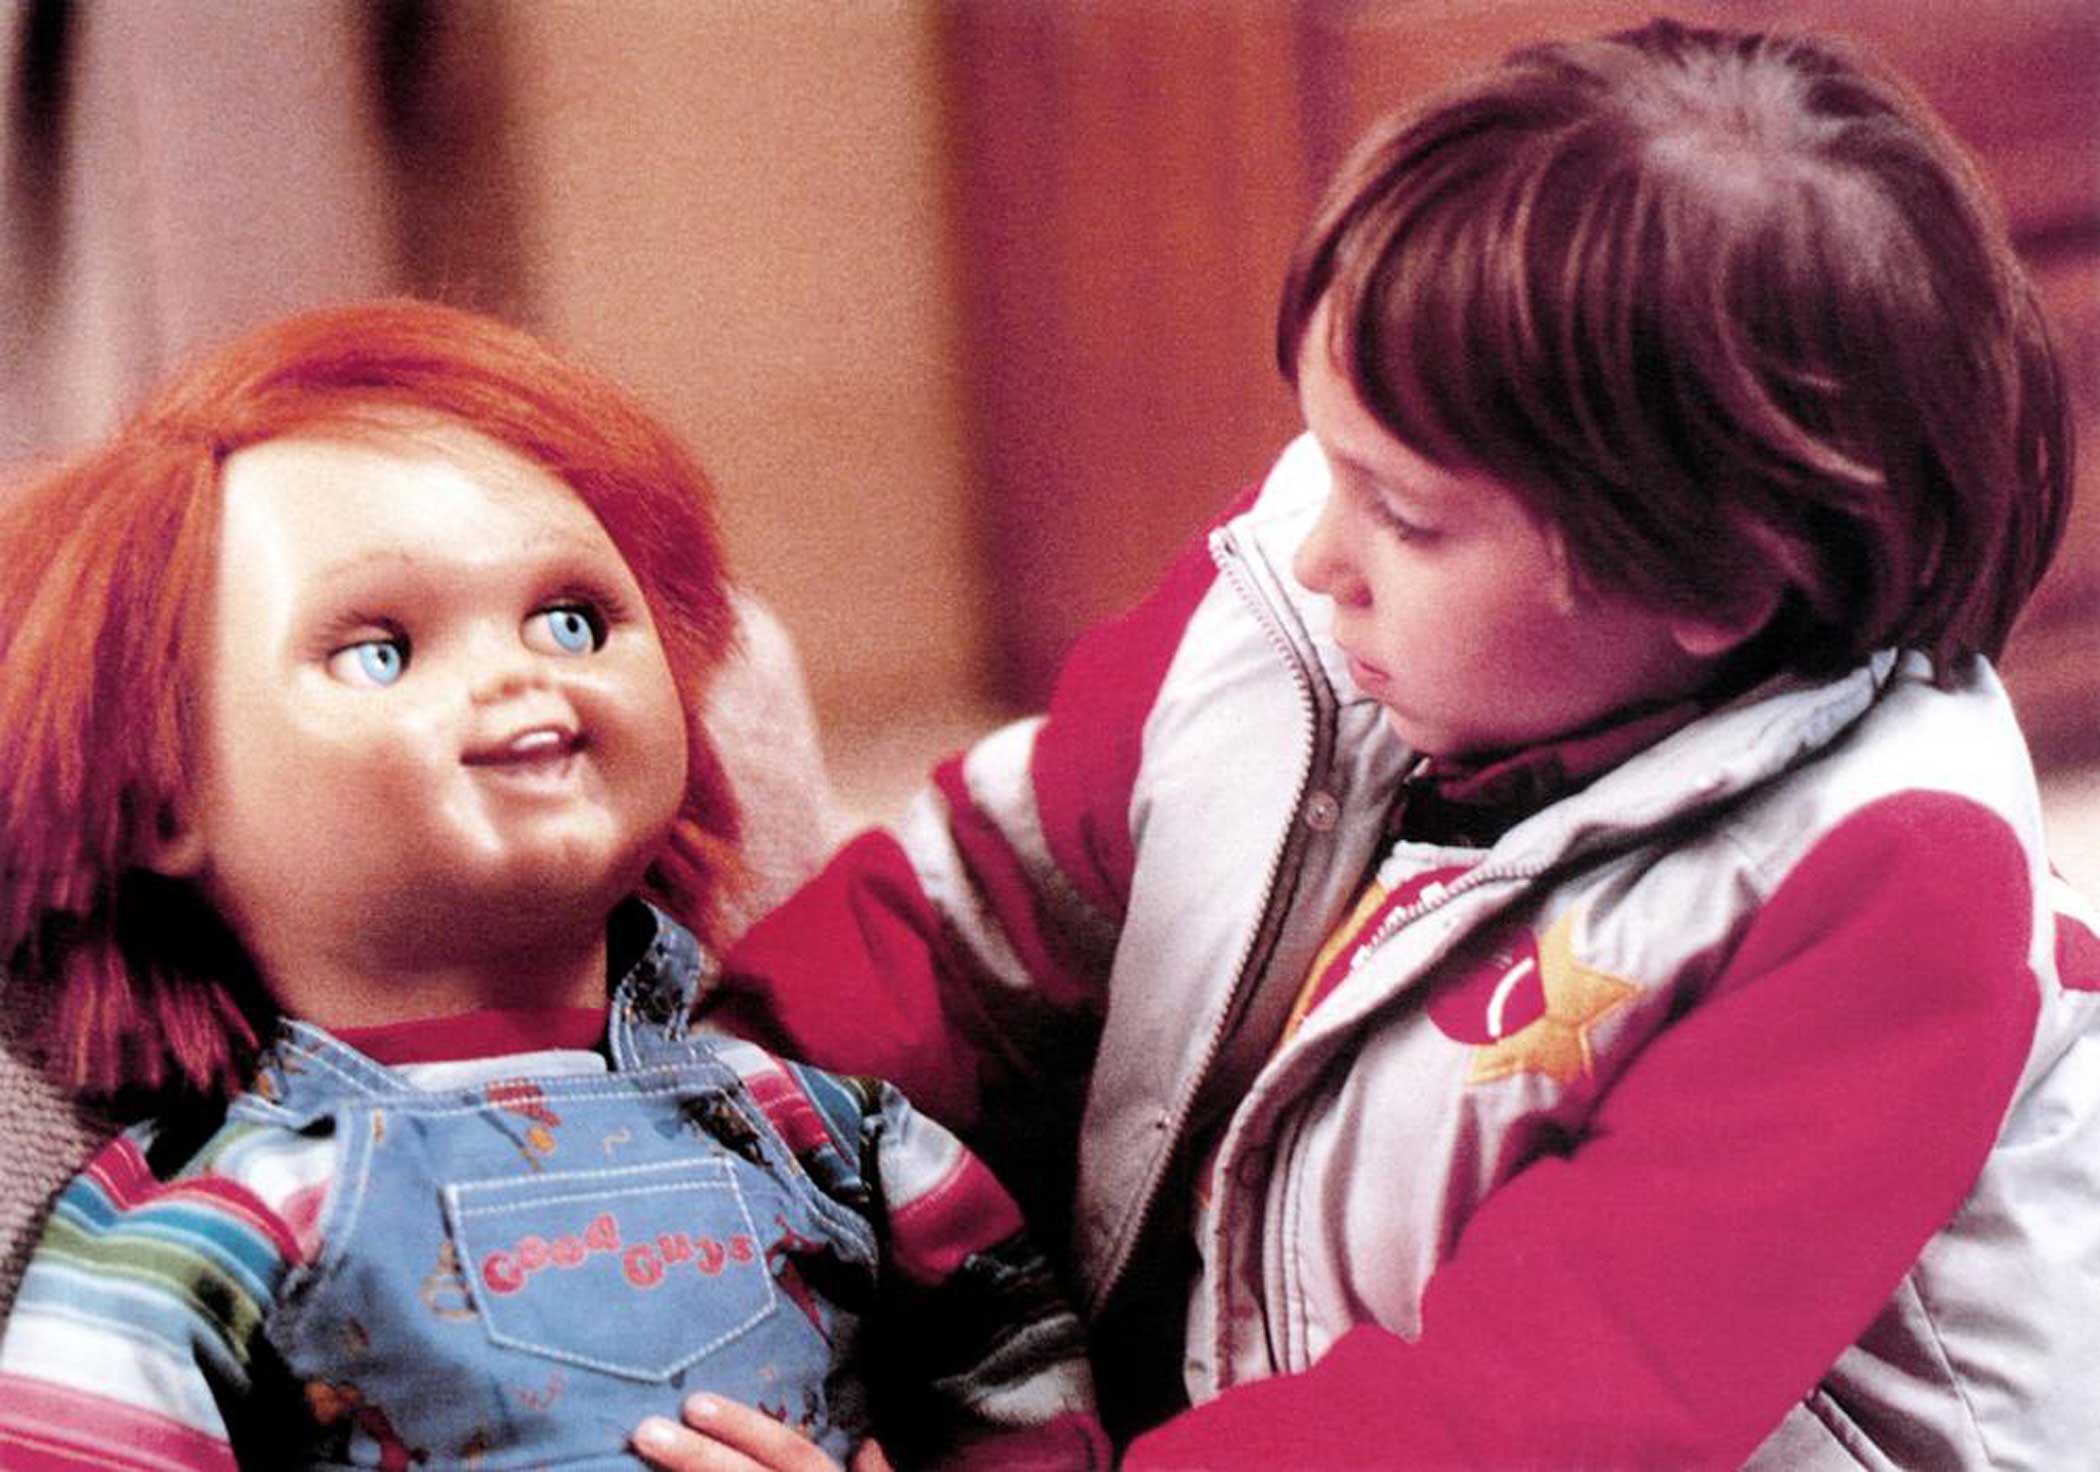 Alex Vincent as Andy Barclay with Chucky in Child's Play